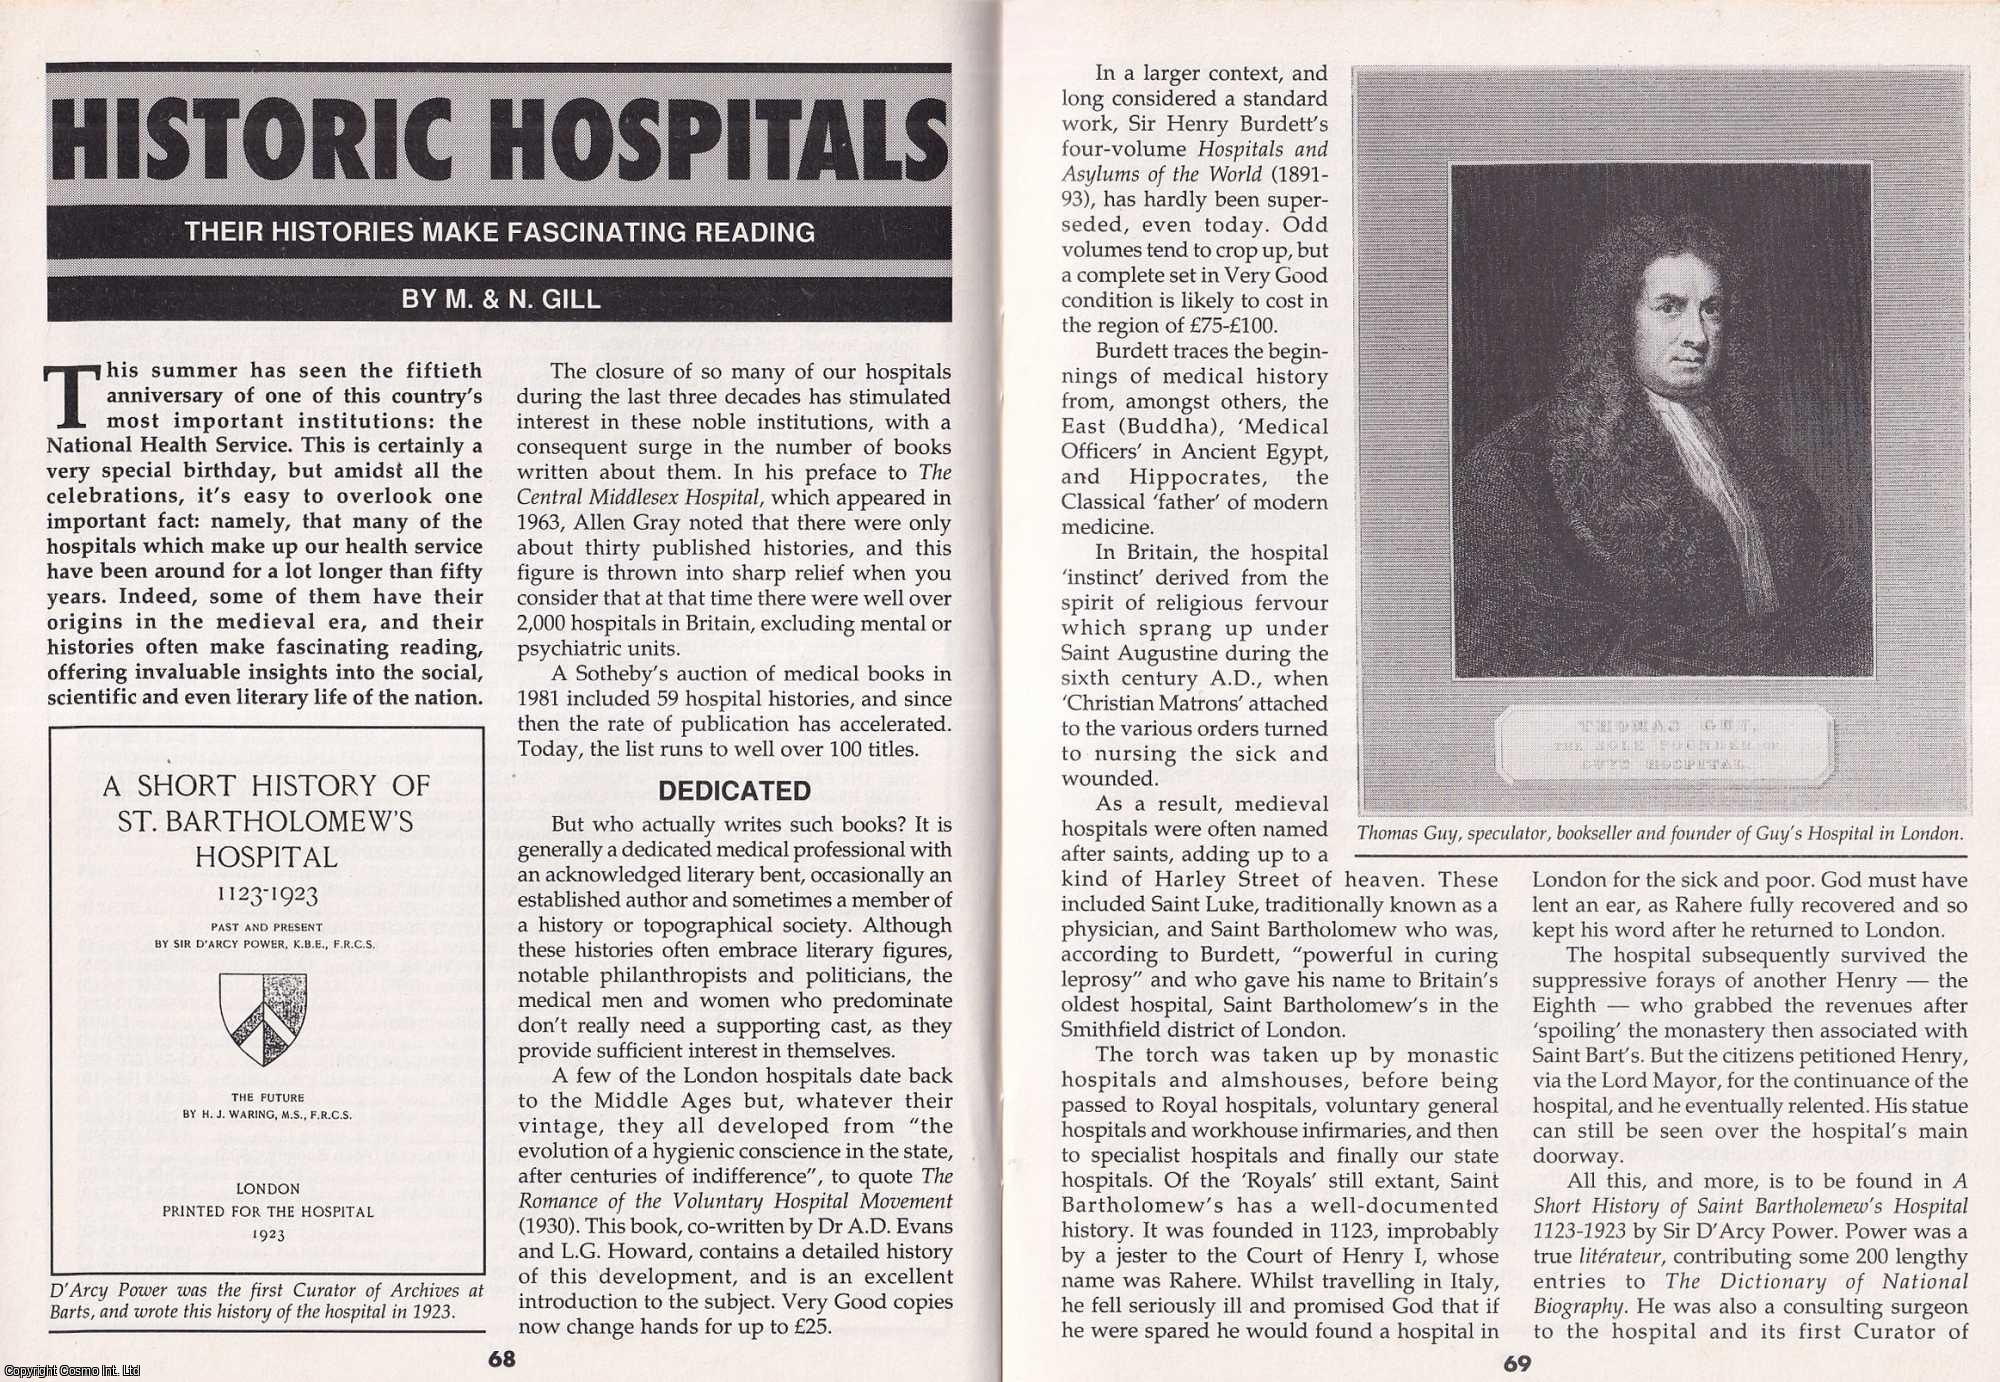 M. Gill & N. Gill - Historic Hospitals. Their Histories Make Fascinating Reading. This is an original article separated from an issue of The Book & Magazine Collector publication.